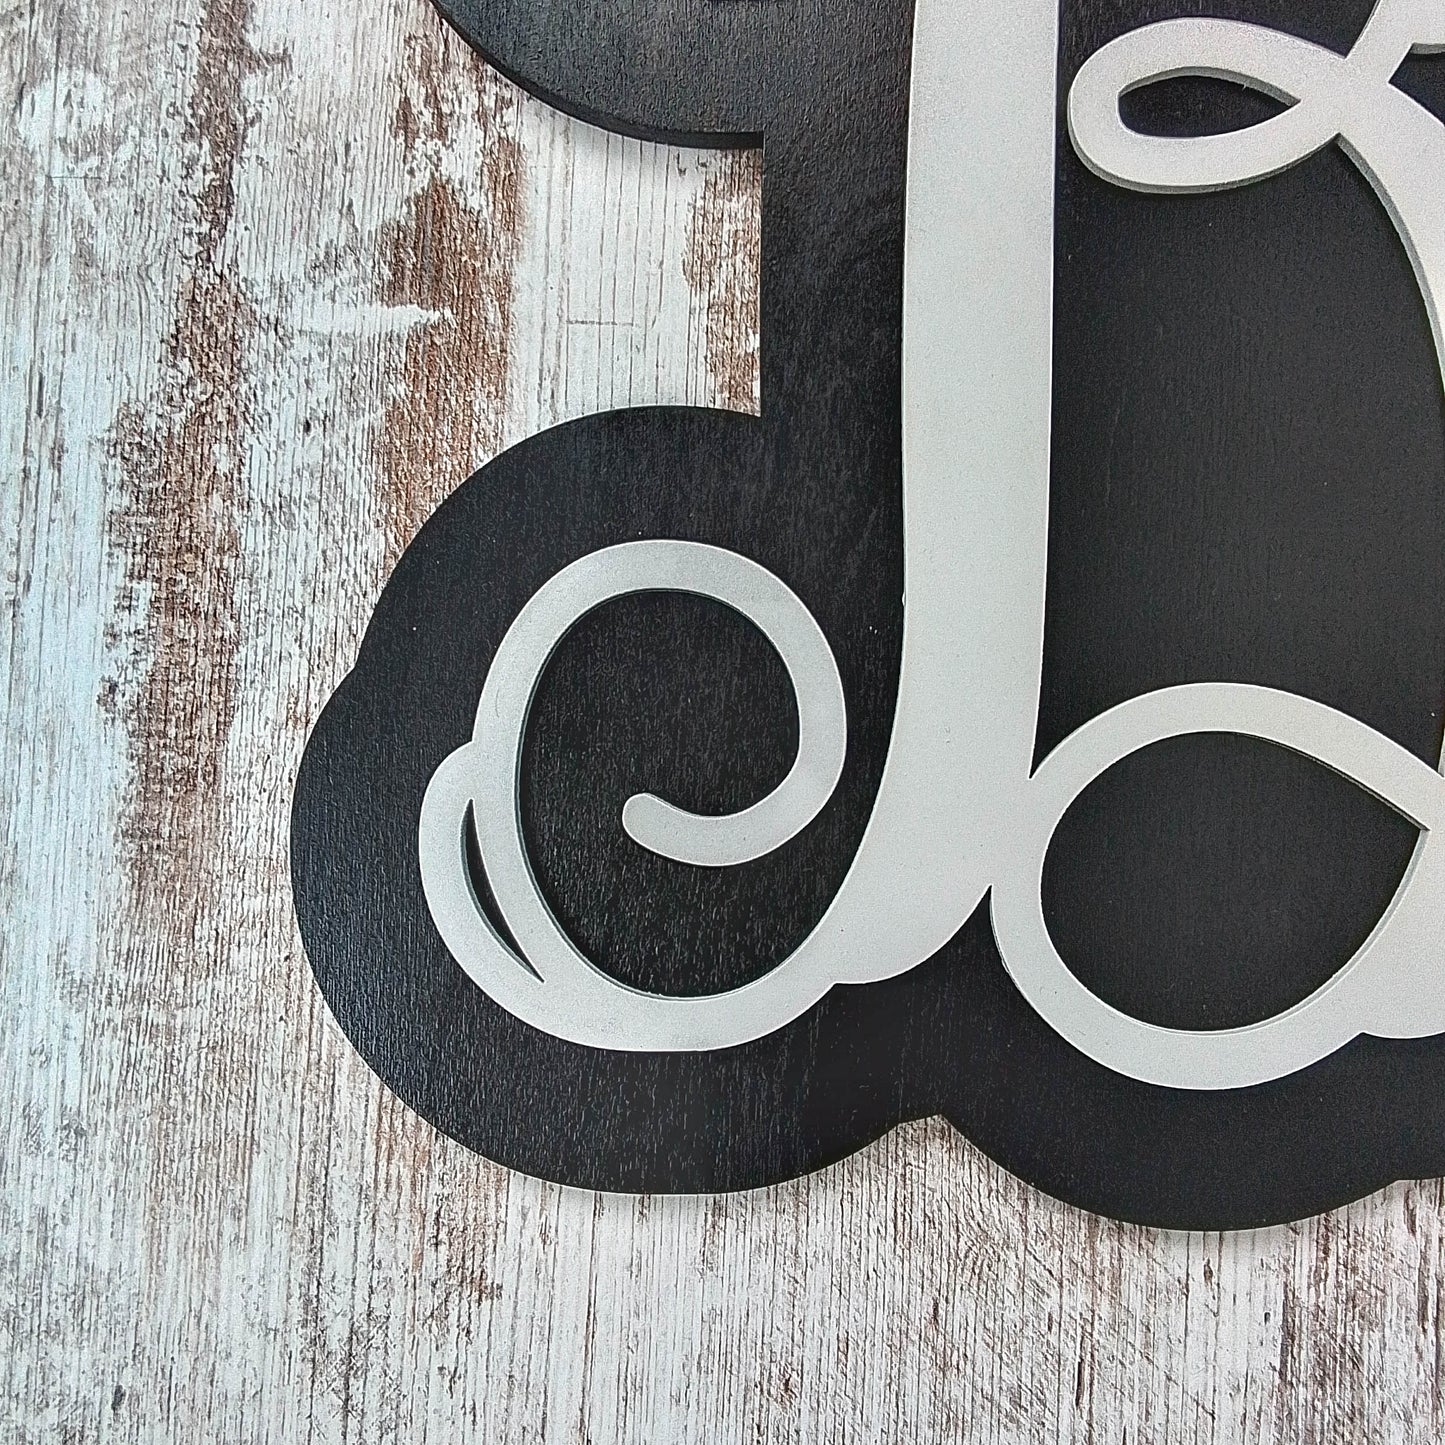 Monogrammed Birthday Gift | White Black Initial Letter Door Hanger Wreath with Bow - LOTS OF COLORS